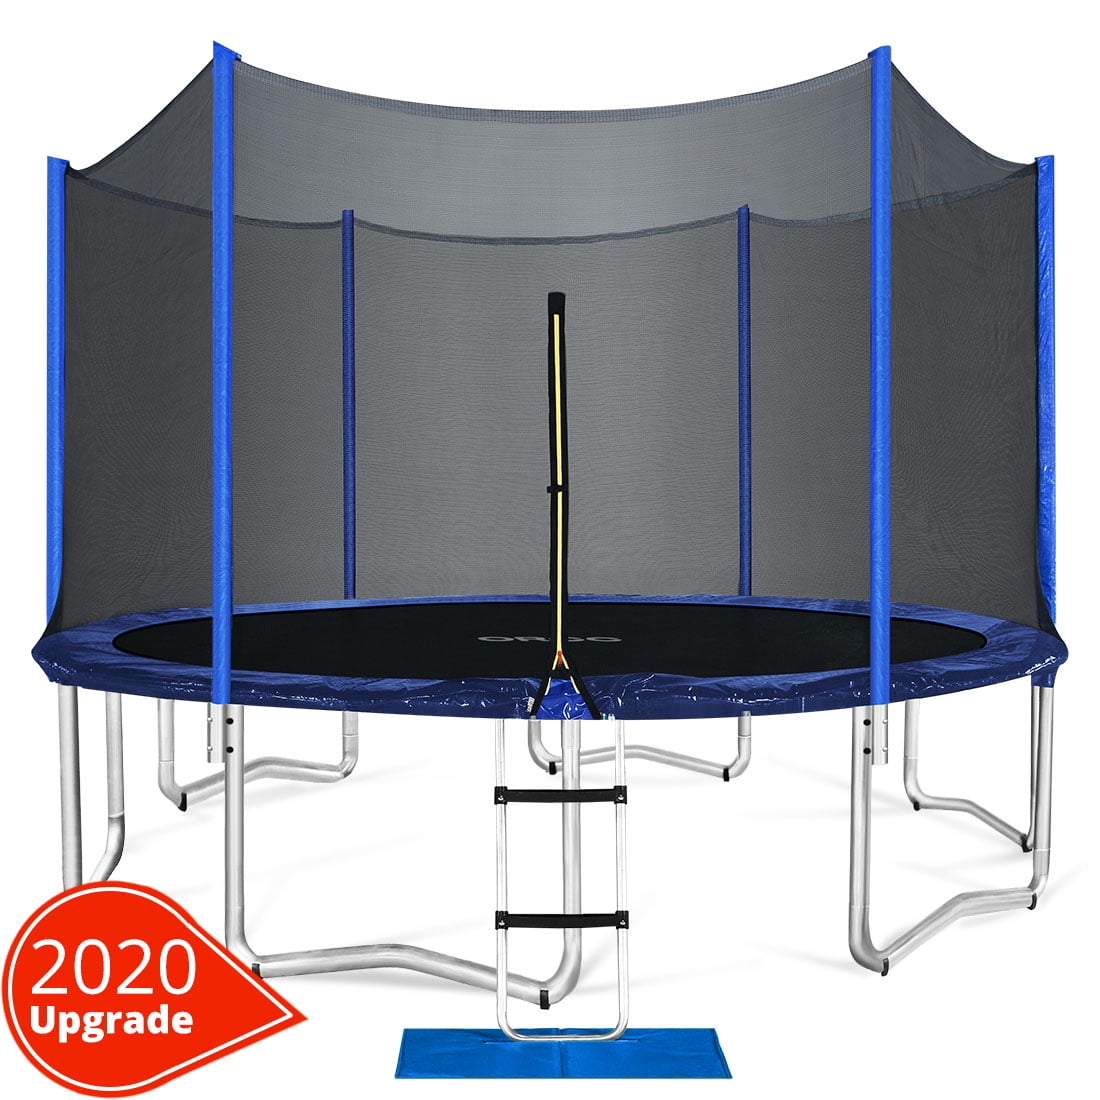 ORCC 12FT Kids Trampoline, T&Uuml;V Certificated Yard Trampoline with all Accessories